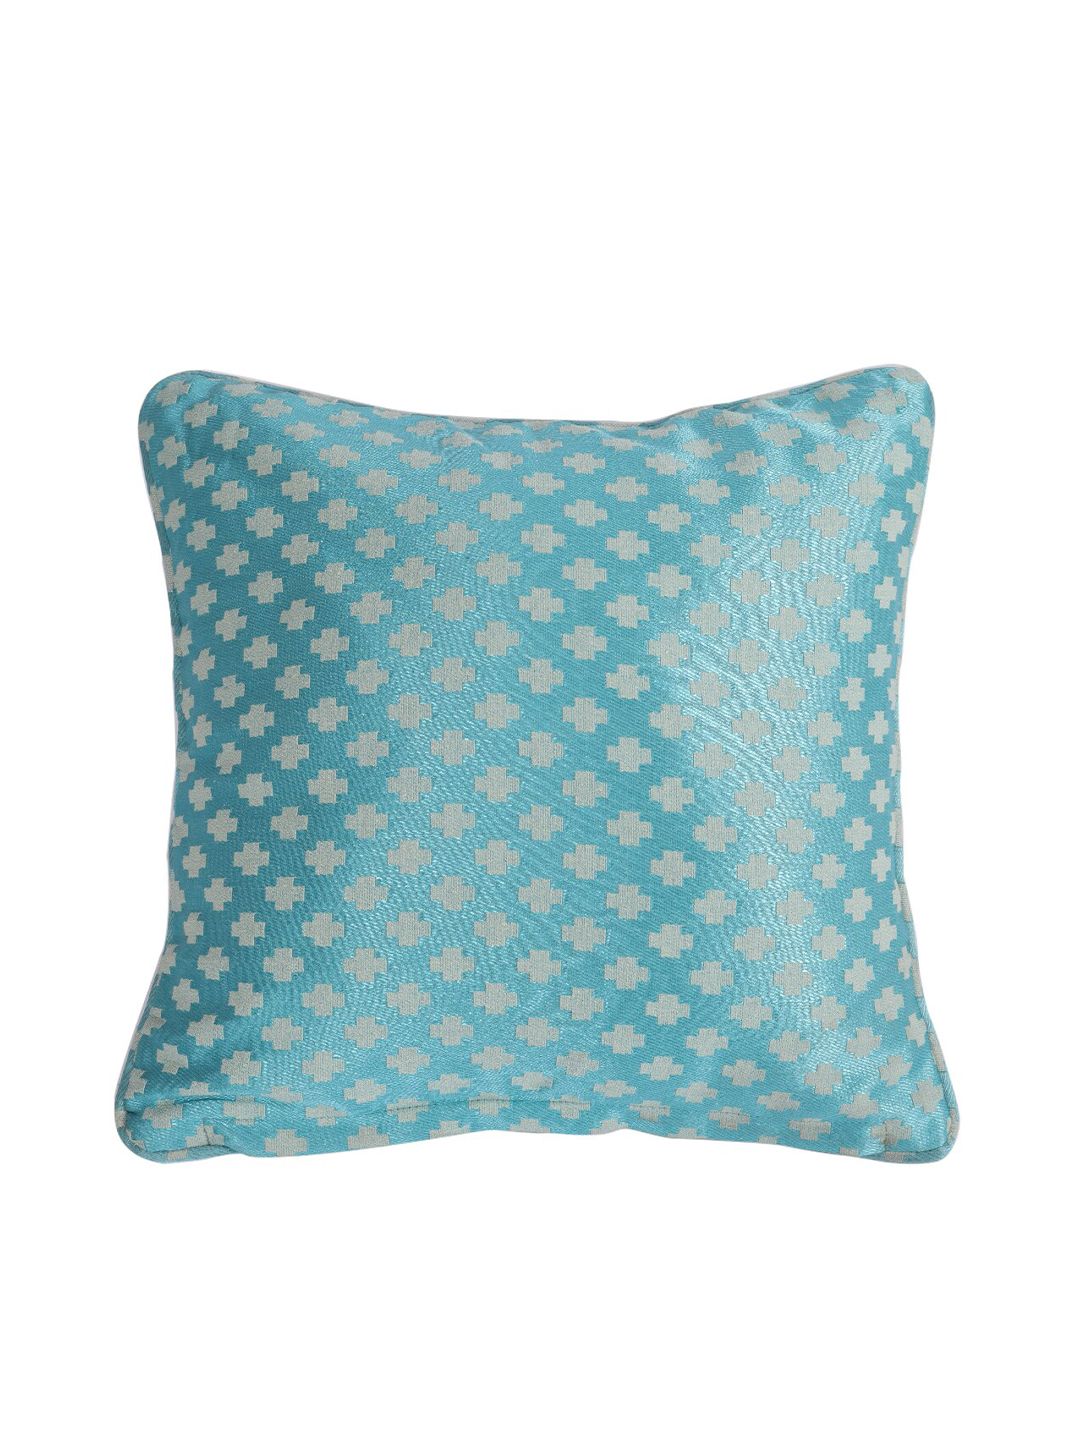 Soumya Set Of 2 Turquoise Blue & Grey Geometric Square Cushion Covers Price in India